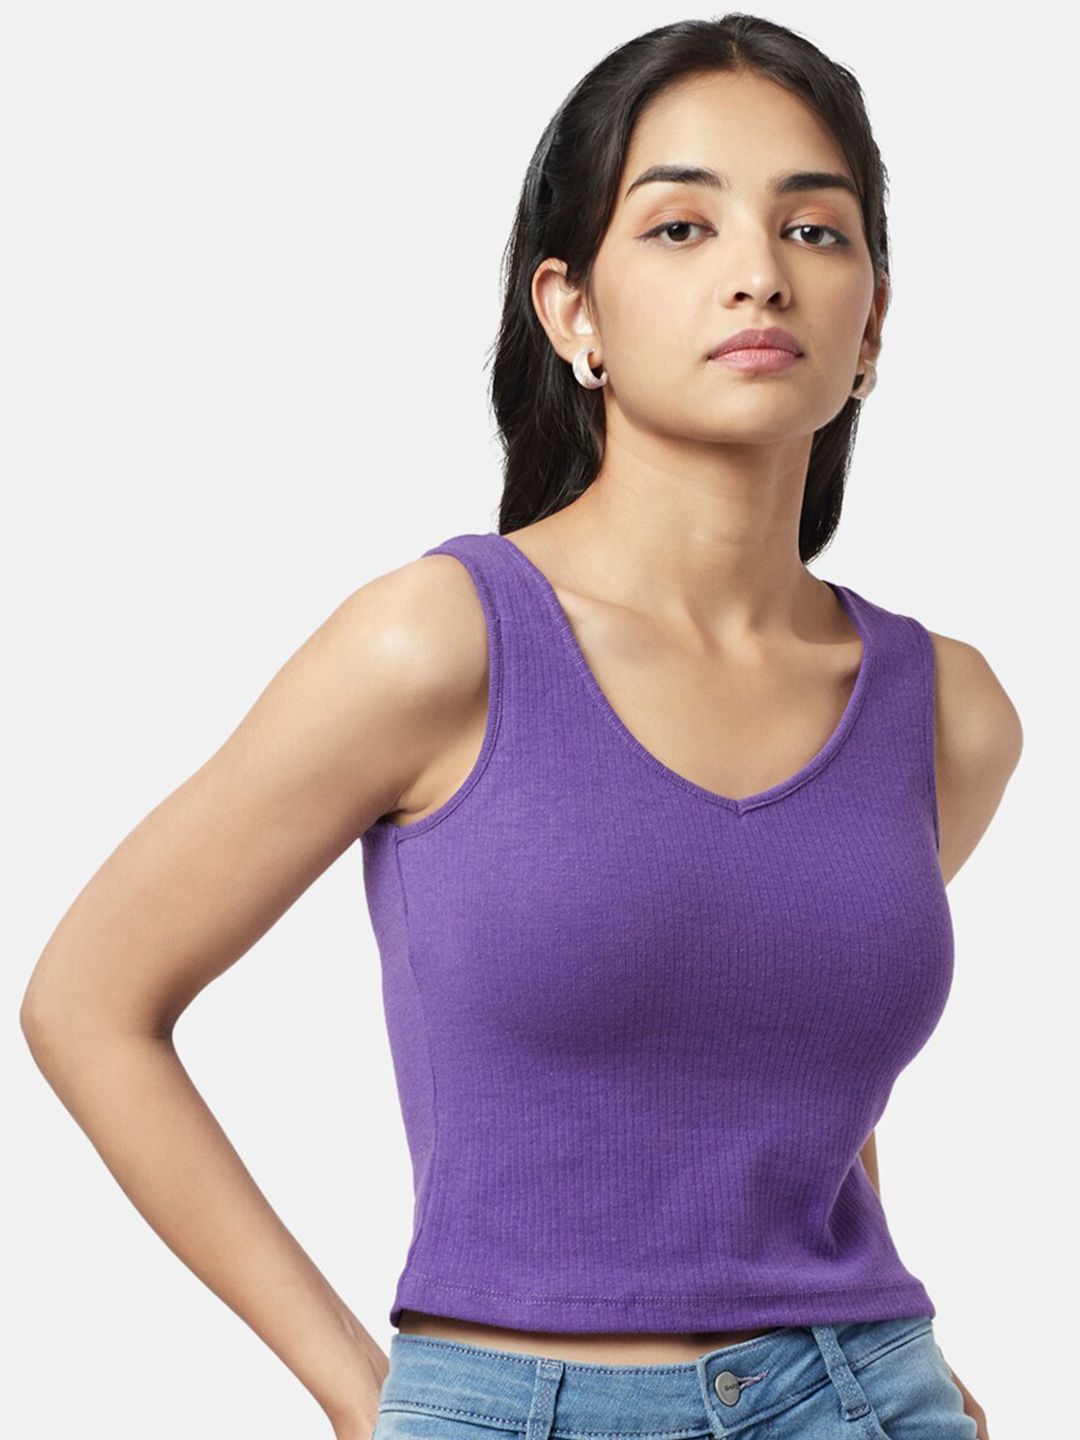 YU by Pantaloons V-Neck Sleeveless Top Price in India